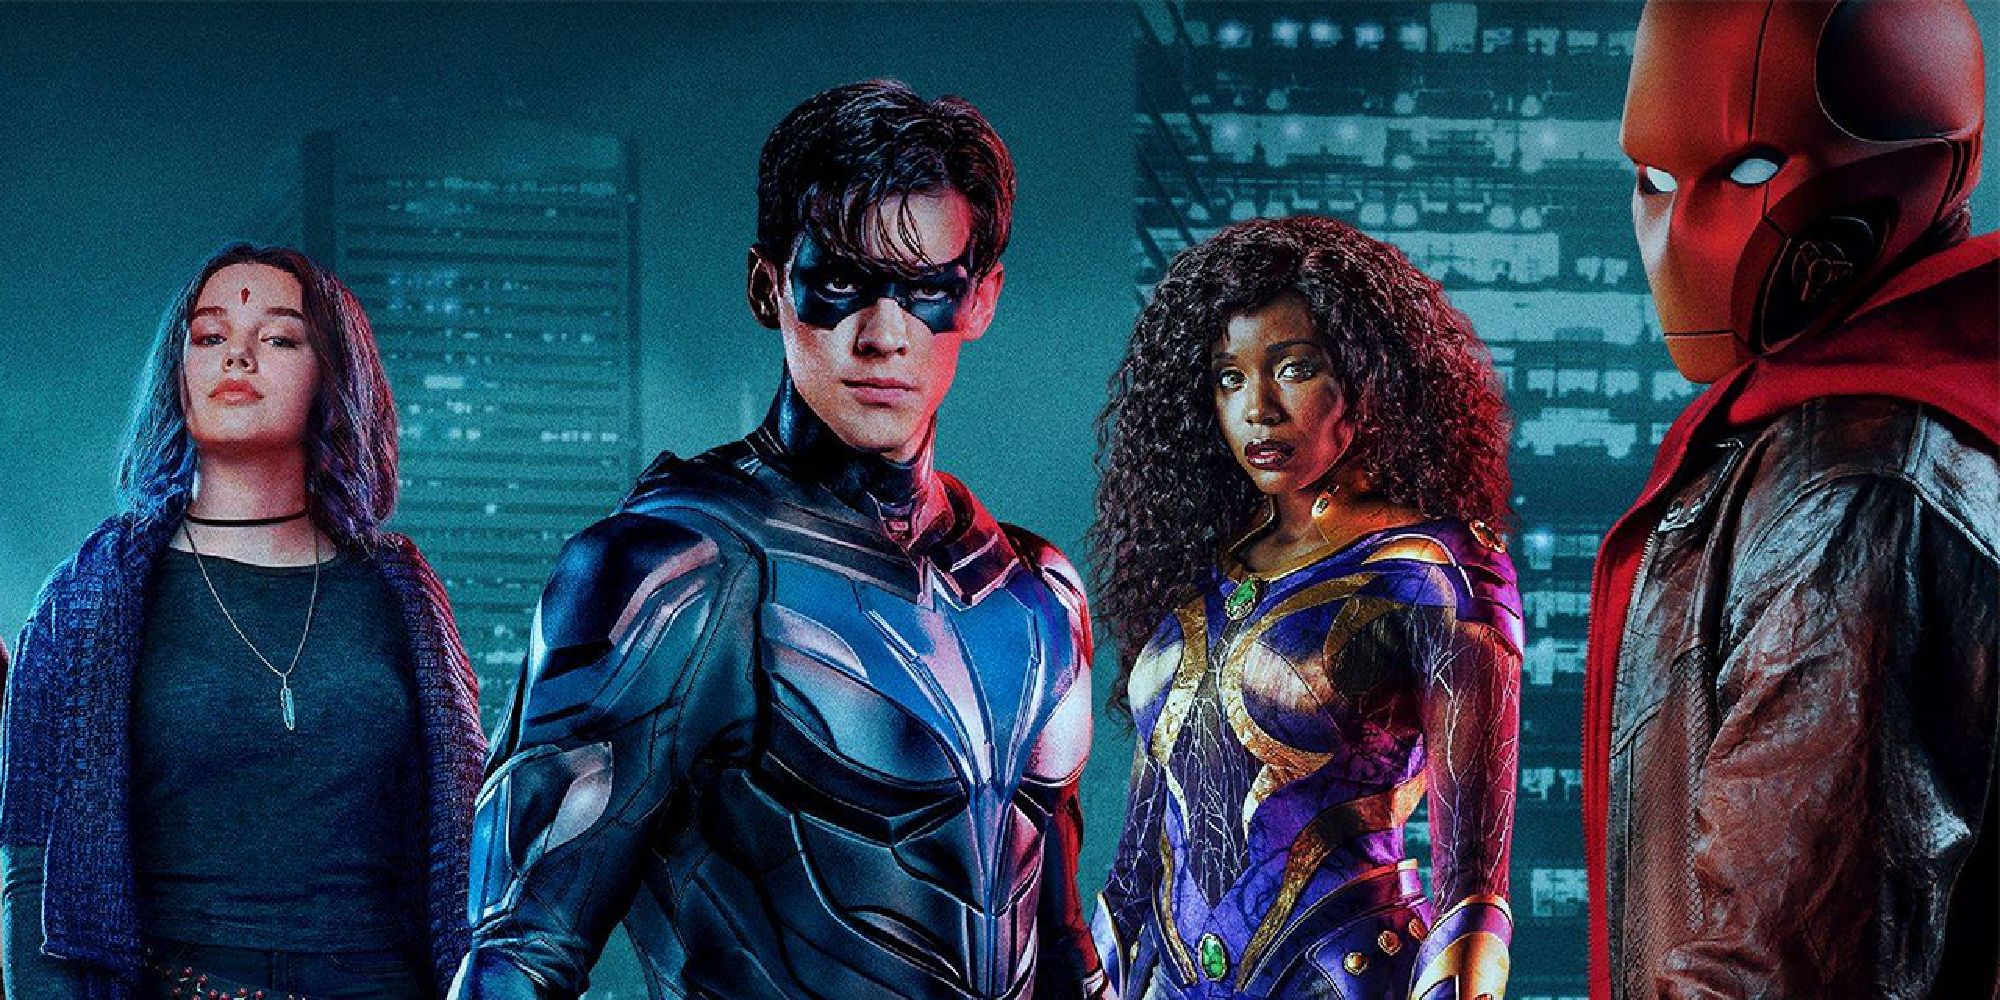 Anna Diop, Ryan Potter, Brenton Thwaites, and Teagan Croft in a promotional shoot for Titans